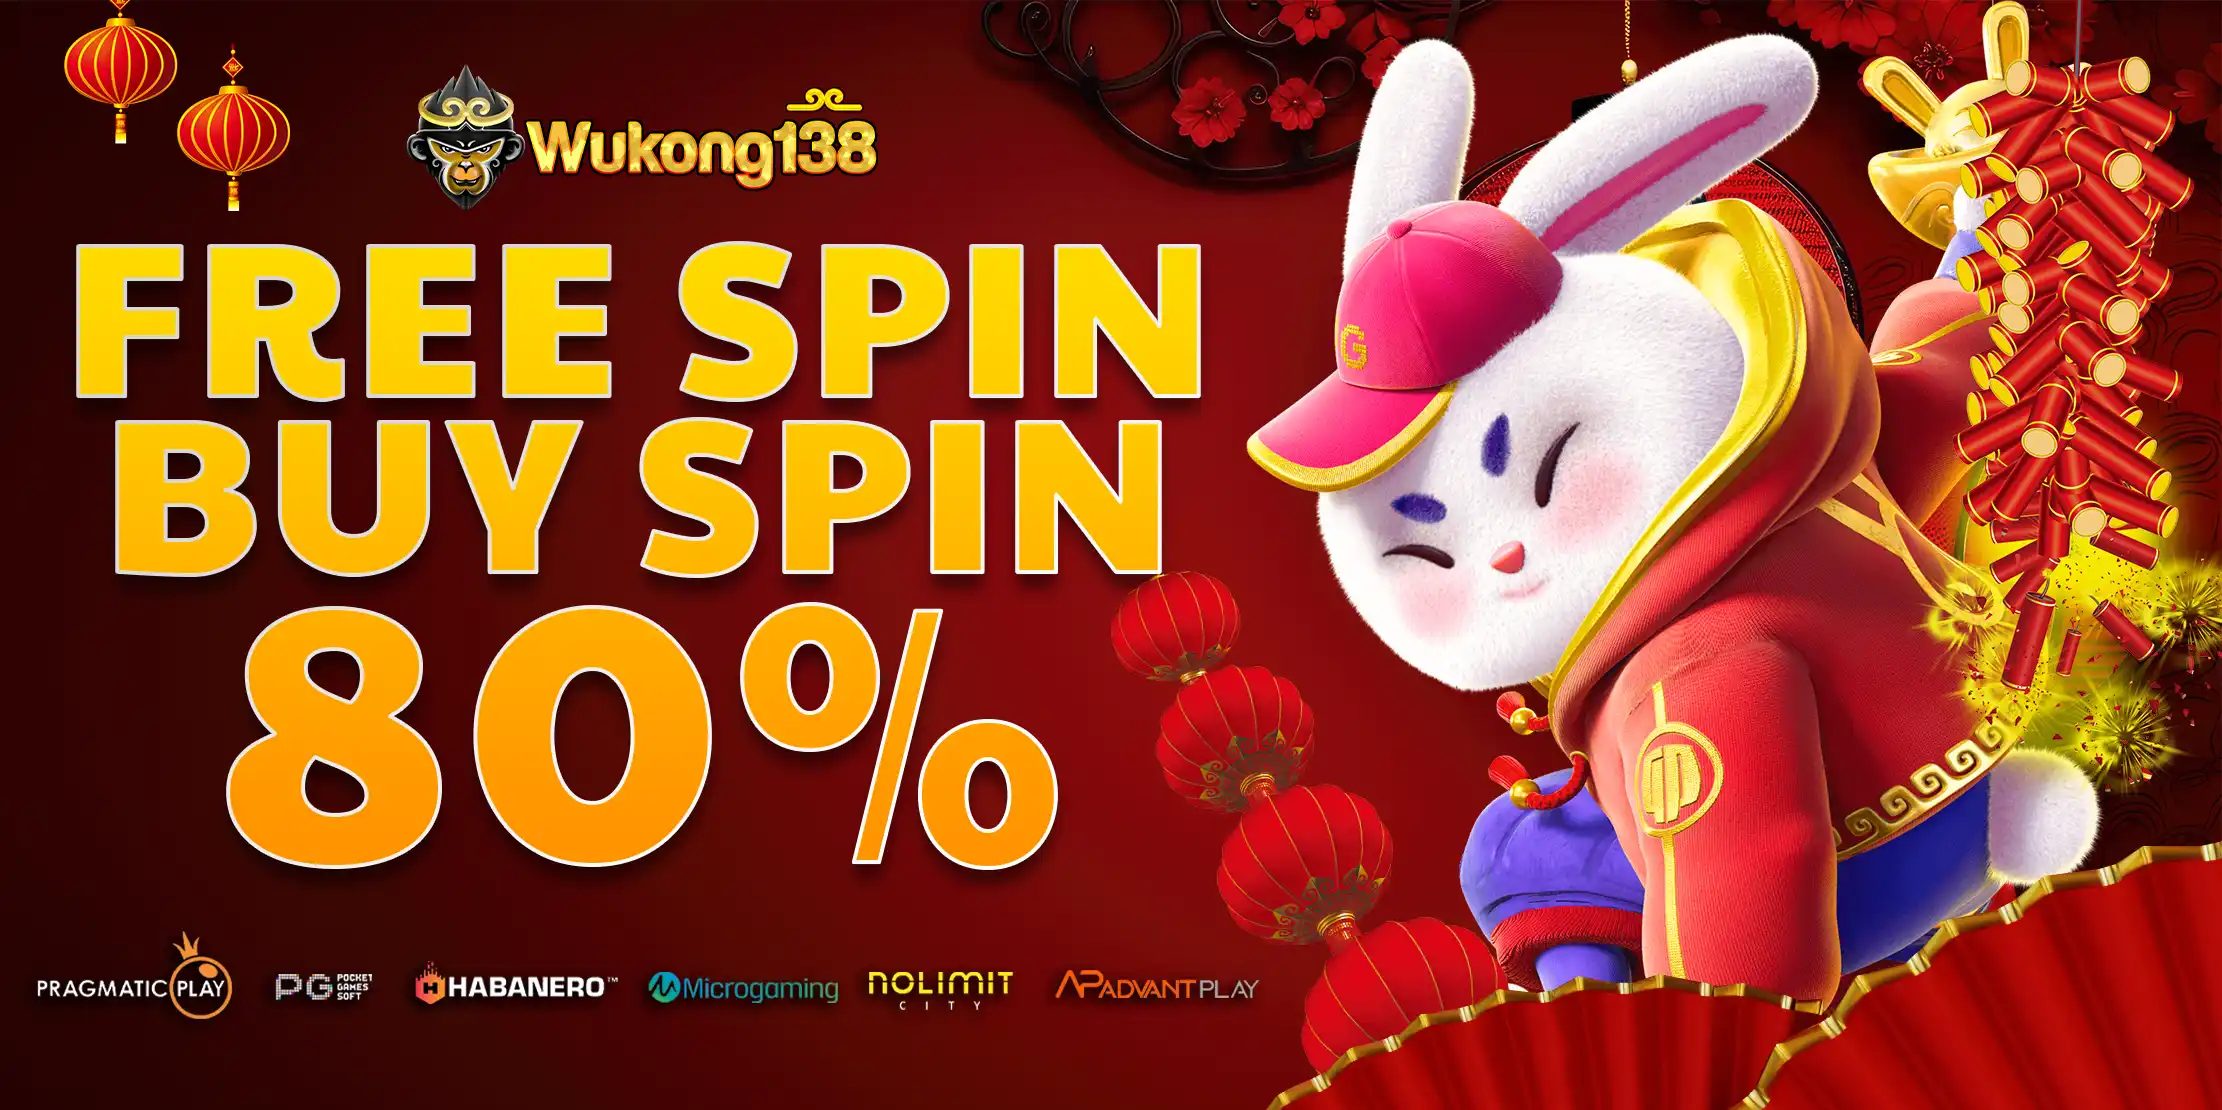 FREESPIN BUY SPIN 80%